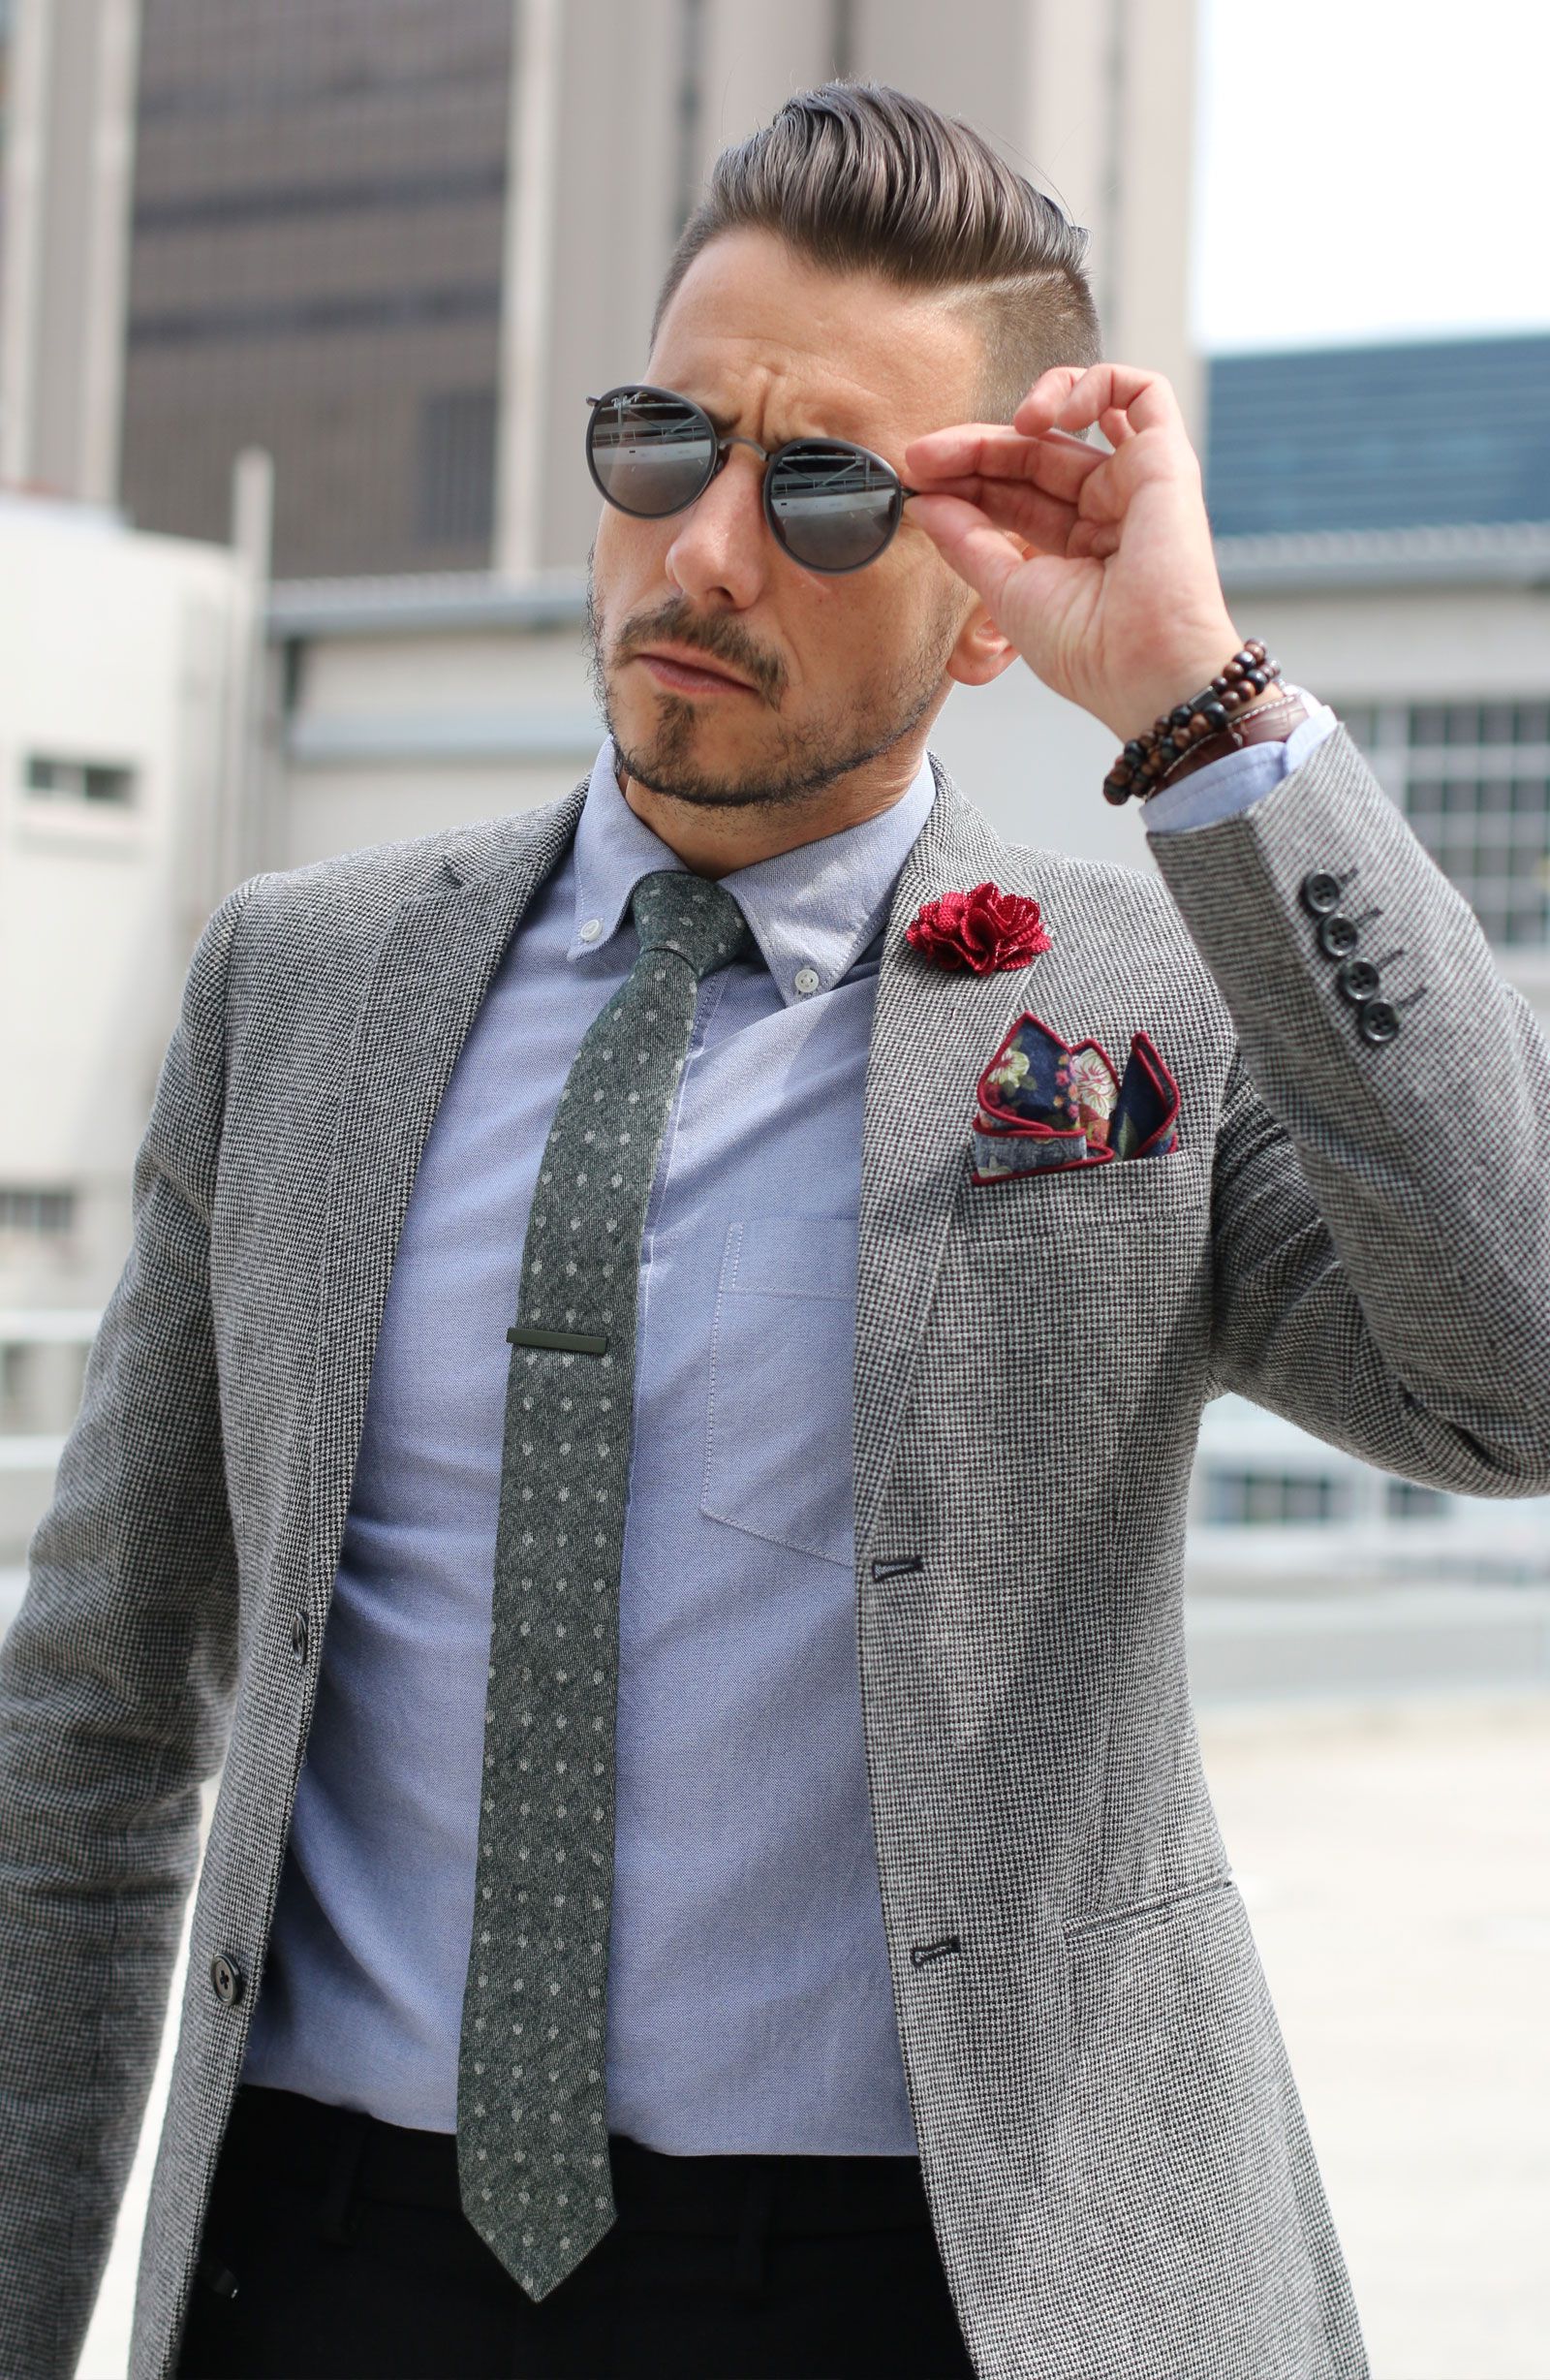 lapel pin to style the suit